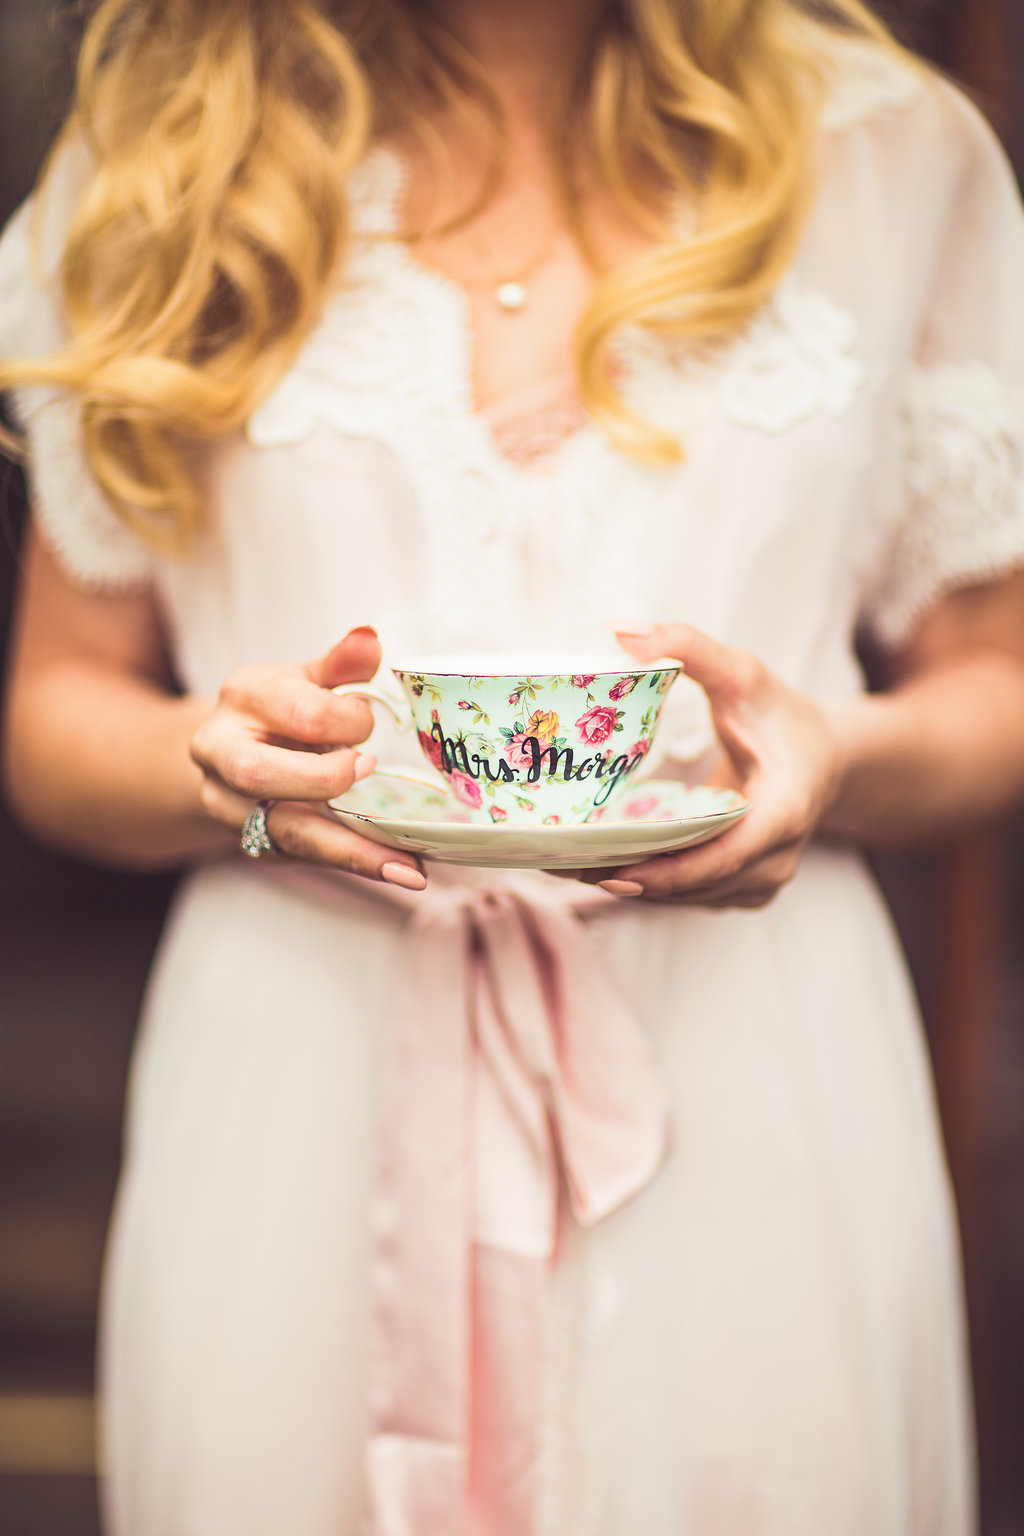 Wedding Photograph Of Woman Holding a Teacup Los Angeles